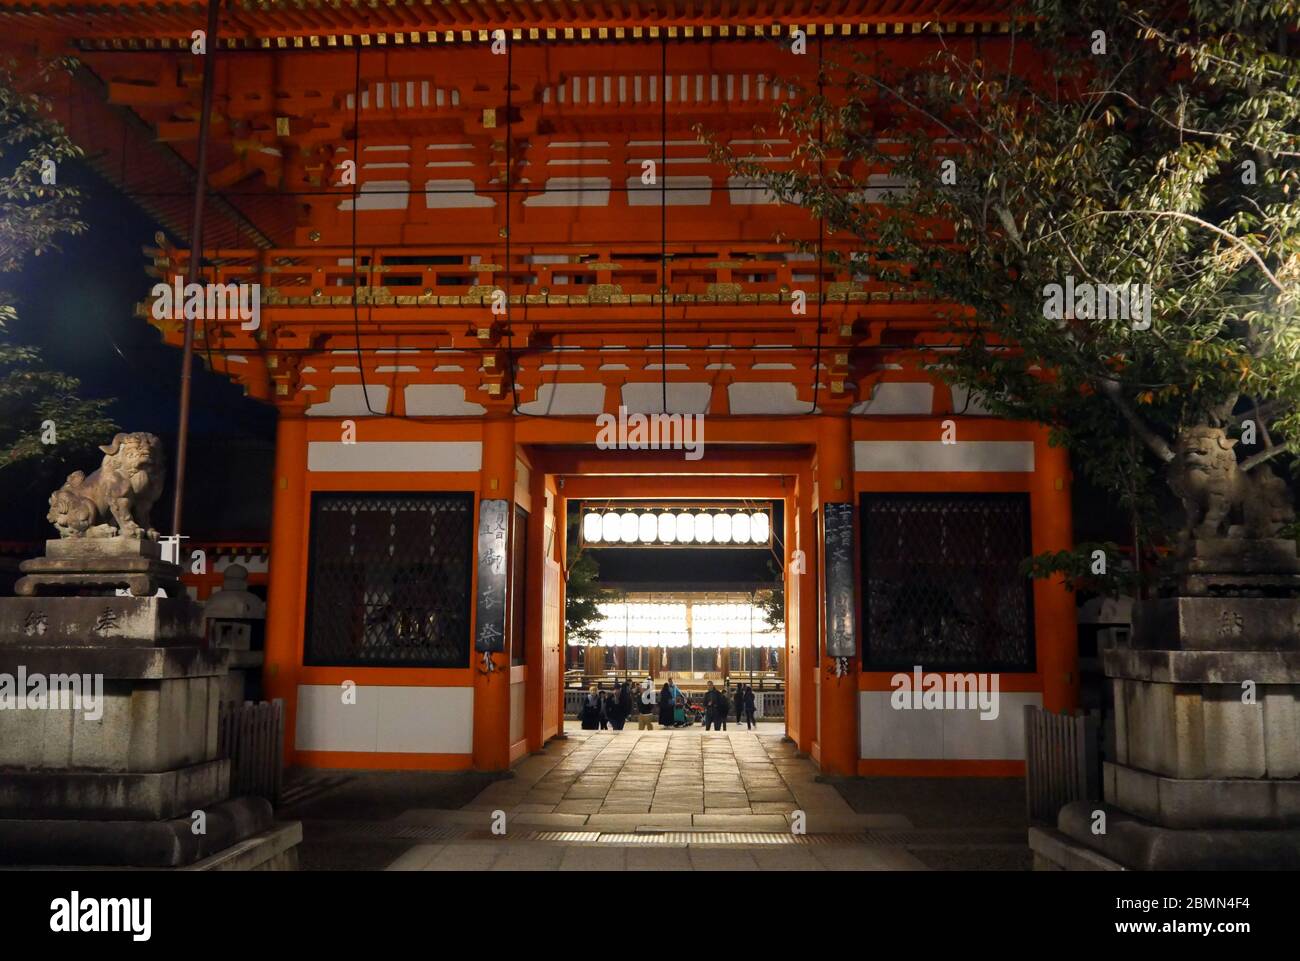 KYOTO, JAPAN - NOVEMBER 06, 2019: The gate of Yasaka Shrine or Gion Shrine in Kyoto at night with a group of visitors inside Stock Photo